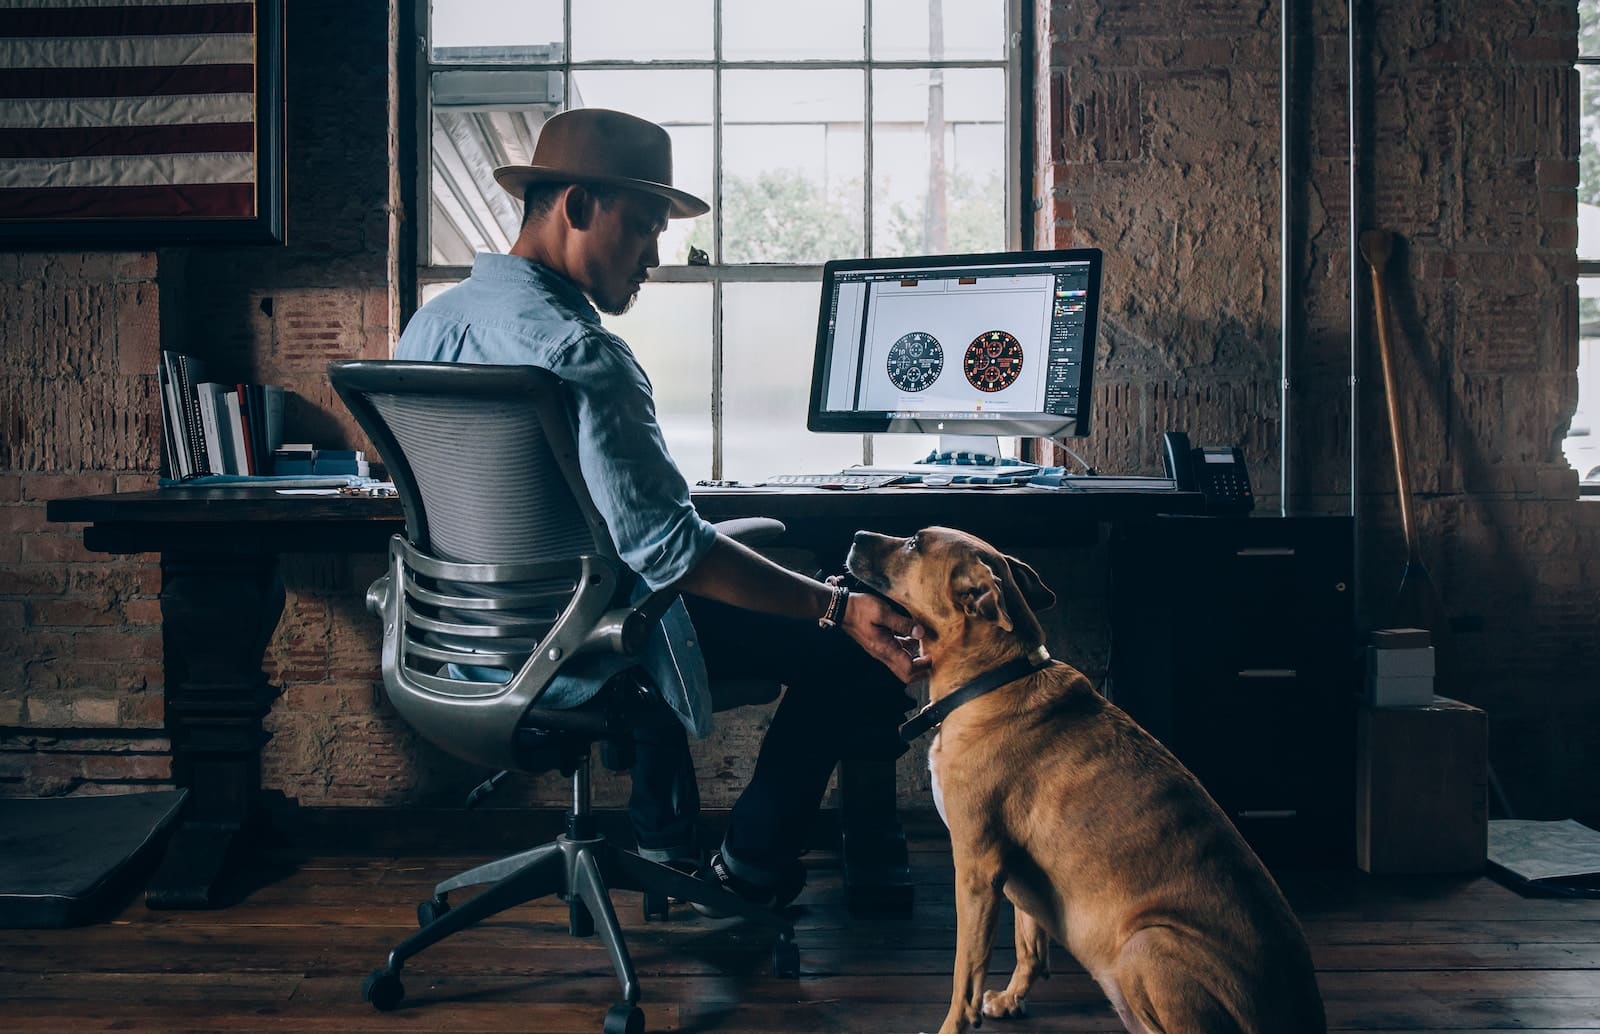 Man working on a computer while his dog is sitting next to him